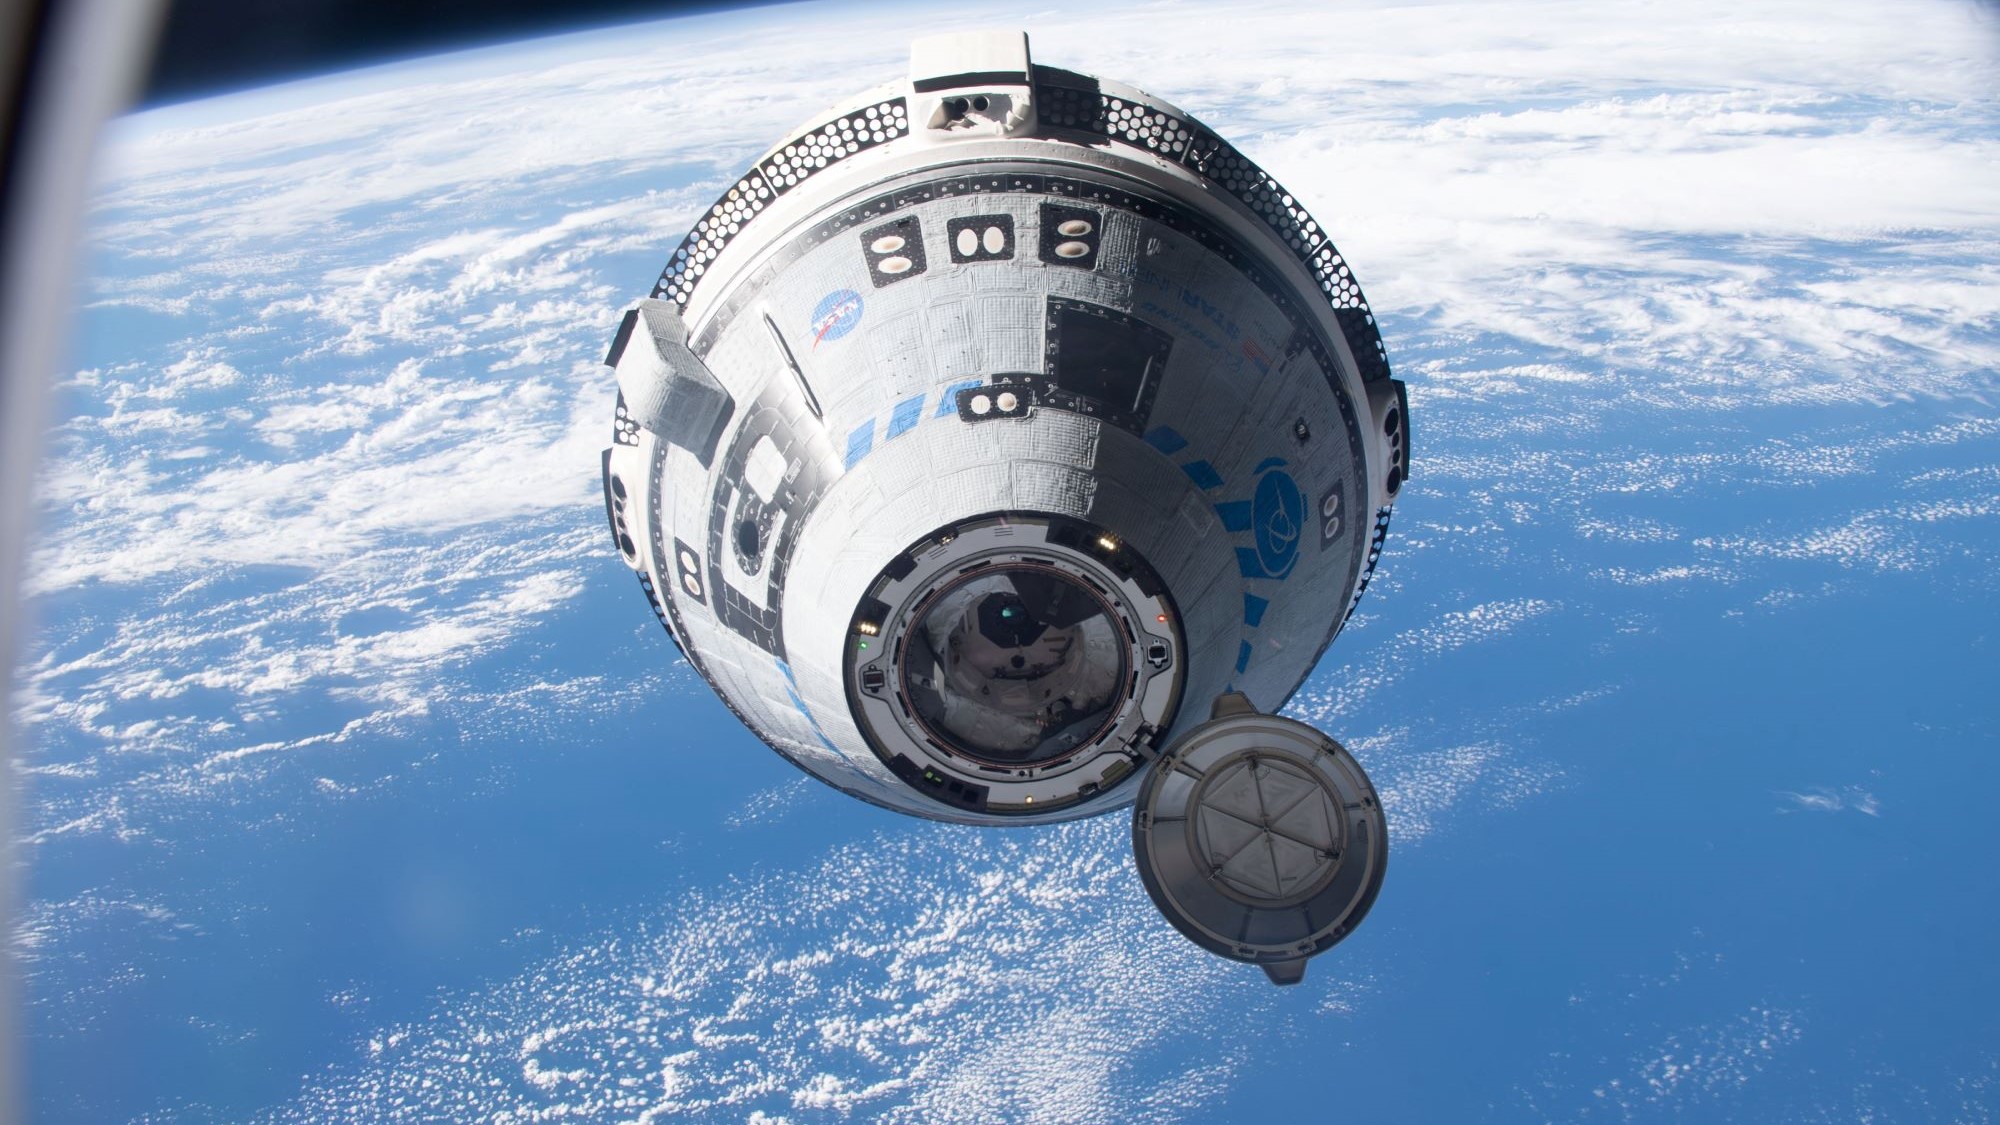 Boeing’s struggling Starliner craft won’t fly astronauts until at least 2024